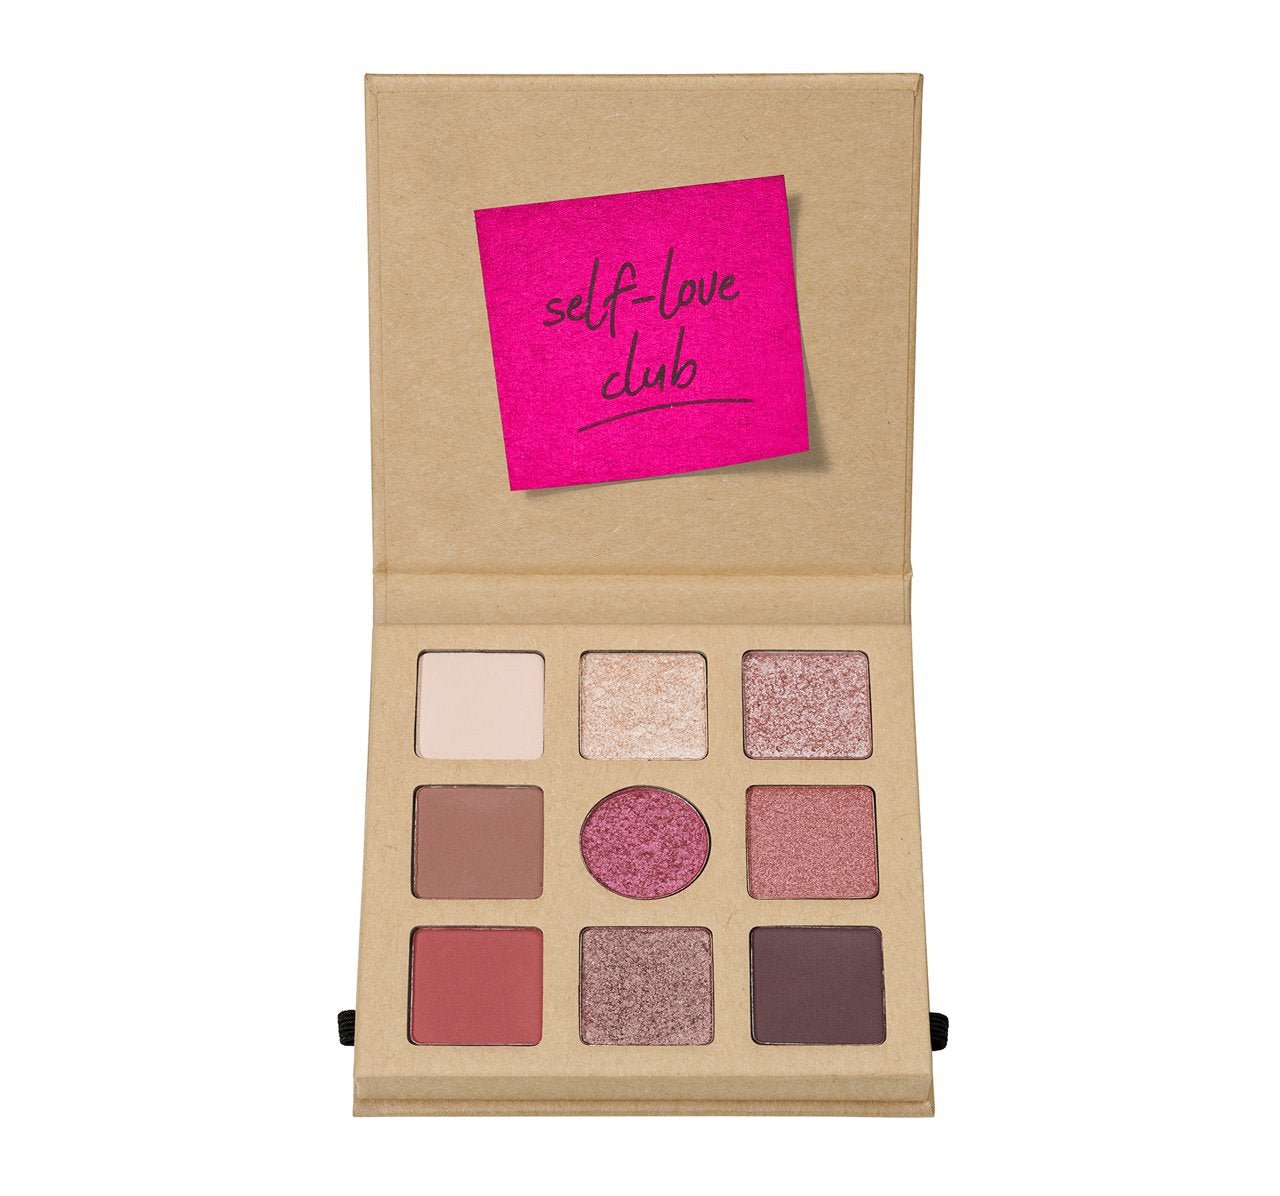 Essence Daily Dose of Love Eyeshadow Palette - AllurebeautypkEssence Daily Dose of Love Eyeshadow Palette